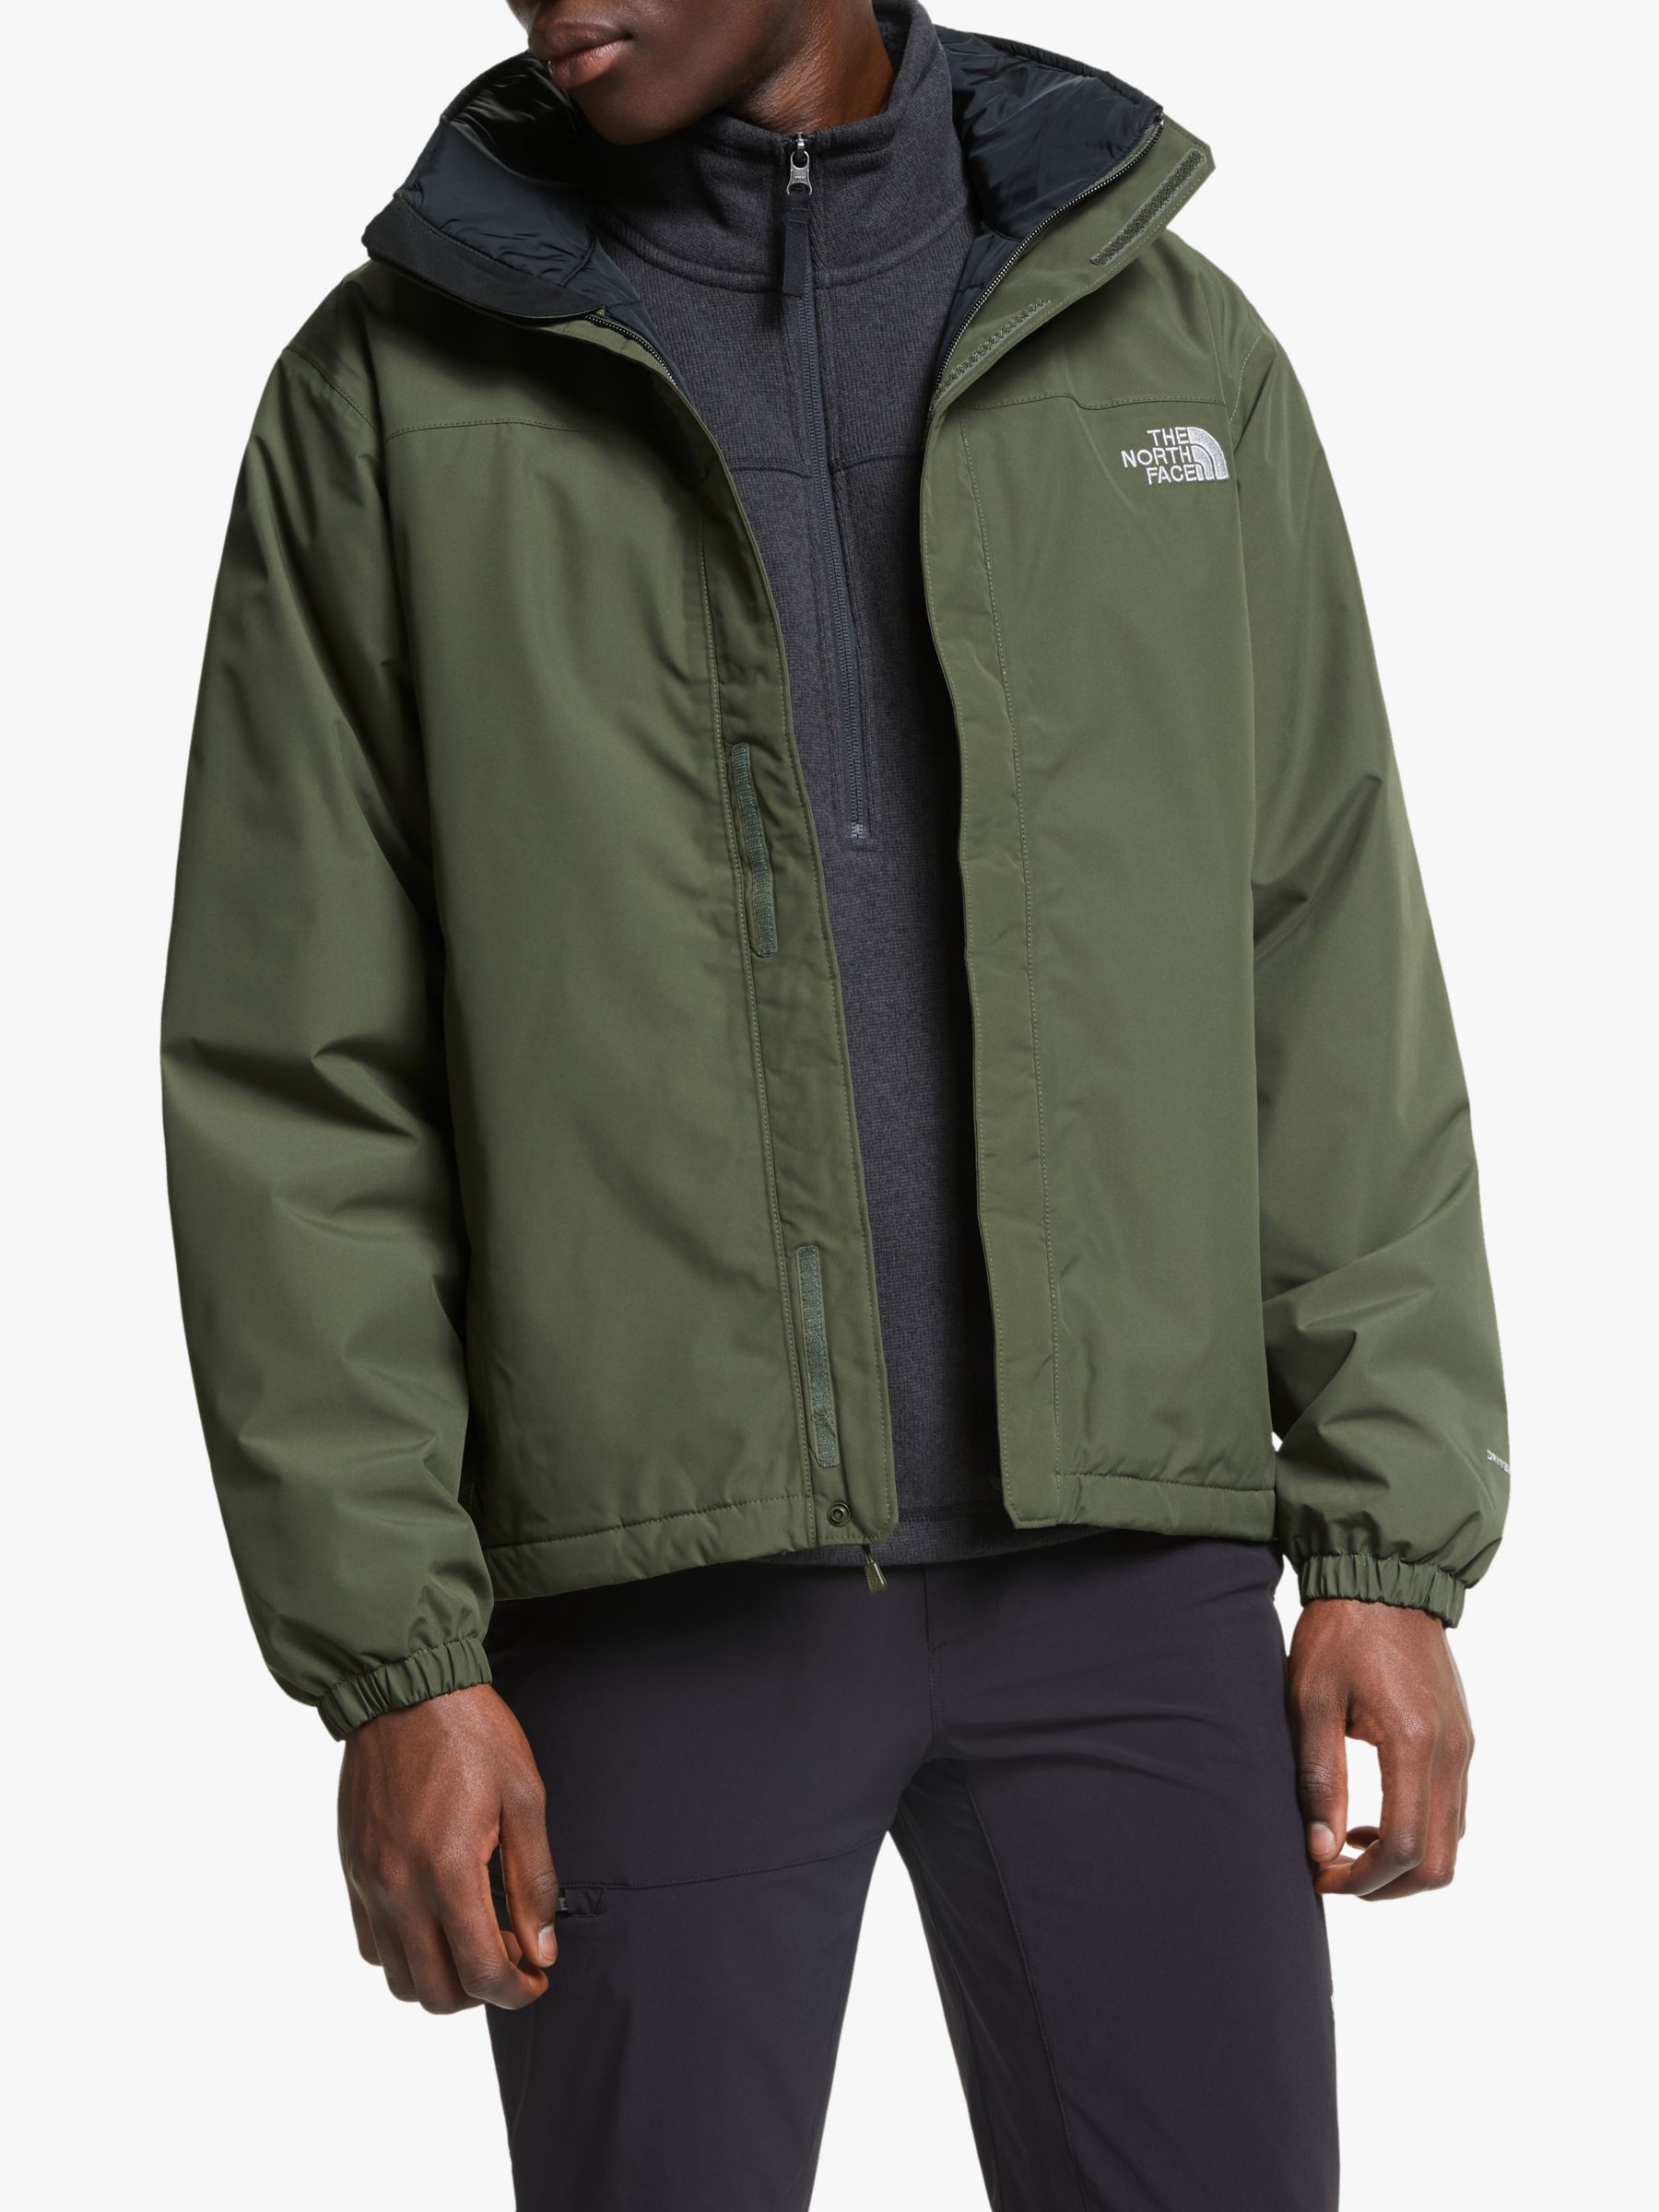 the north face resolve insulated waterproof men's jacket